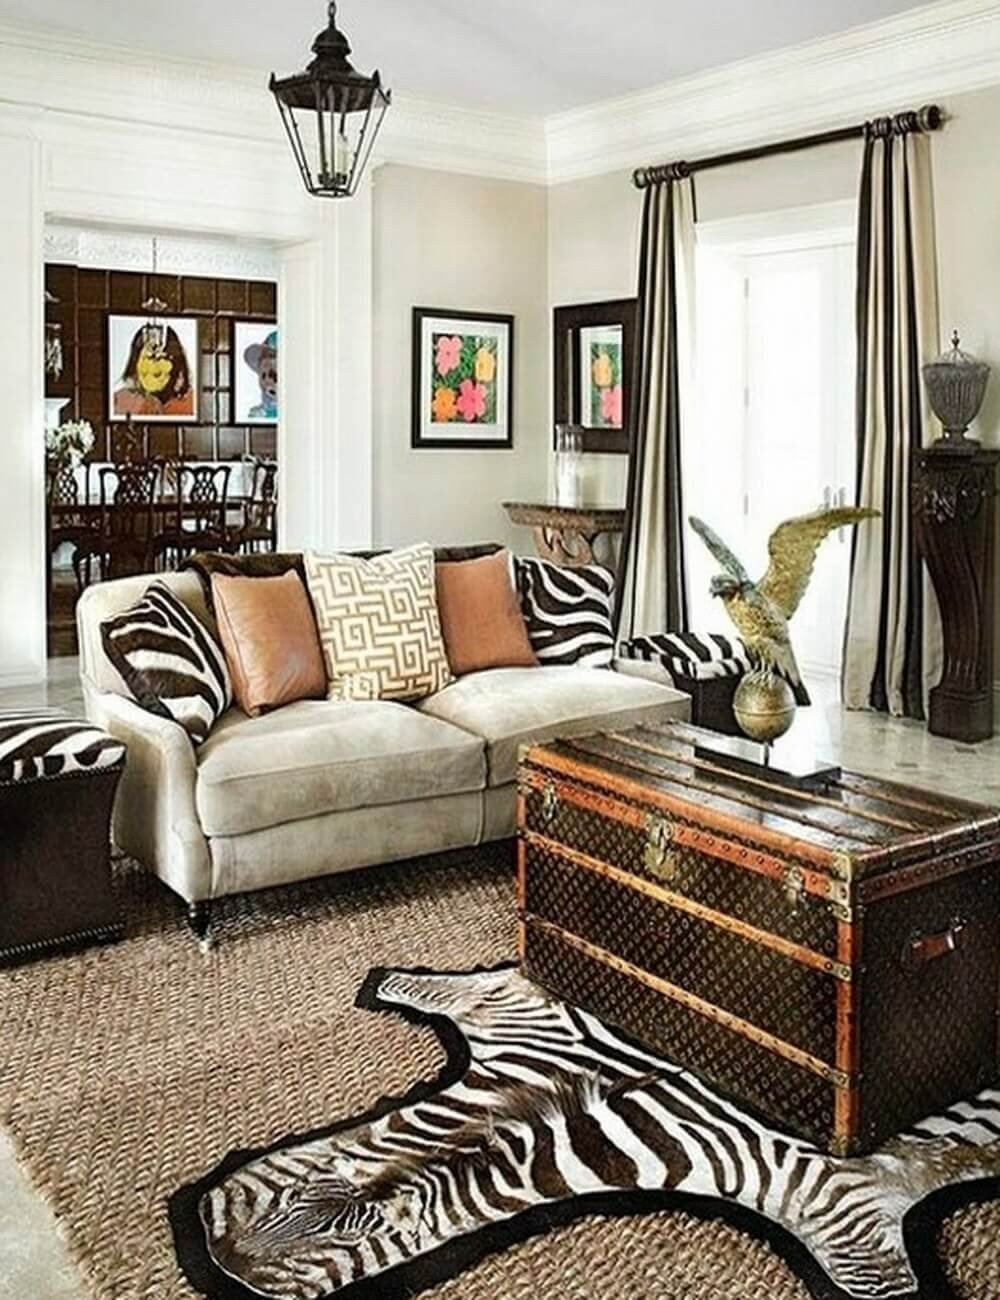 Animal Print Living Room Decor Inspirational Make Your Rooms Look Fierce and Wild by Using Zebra Print